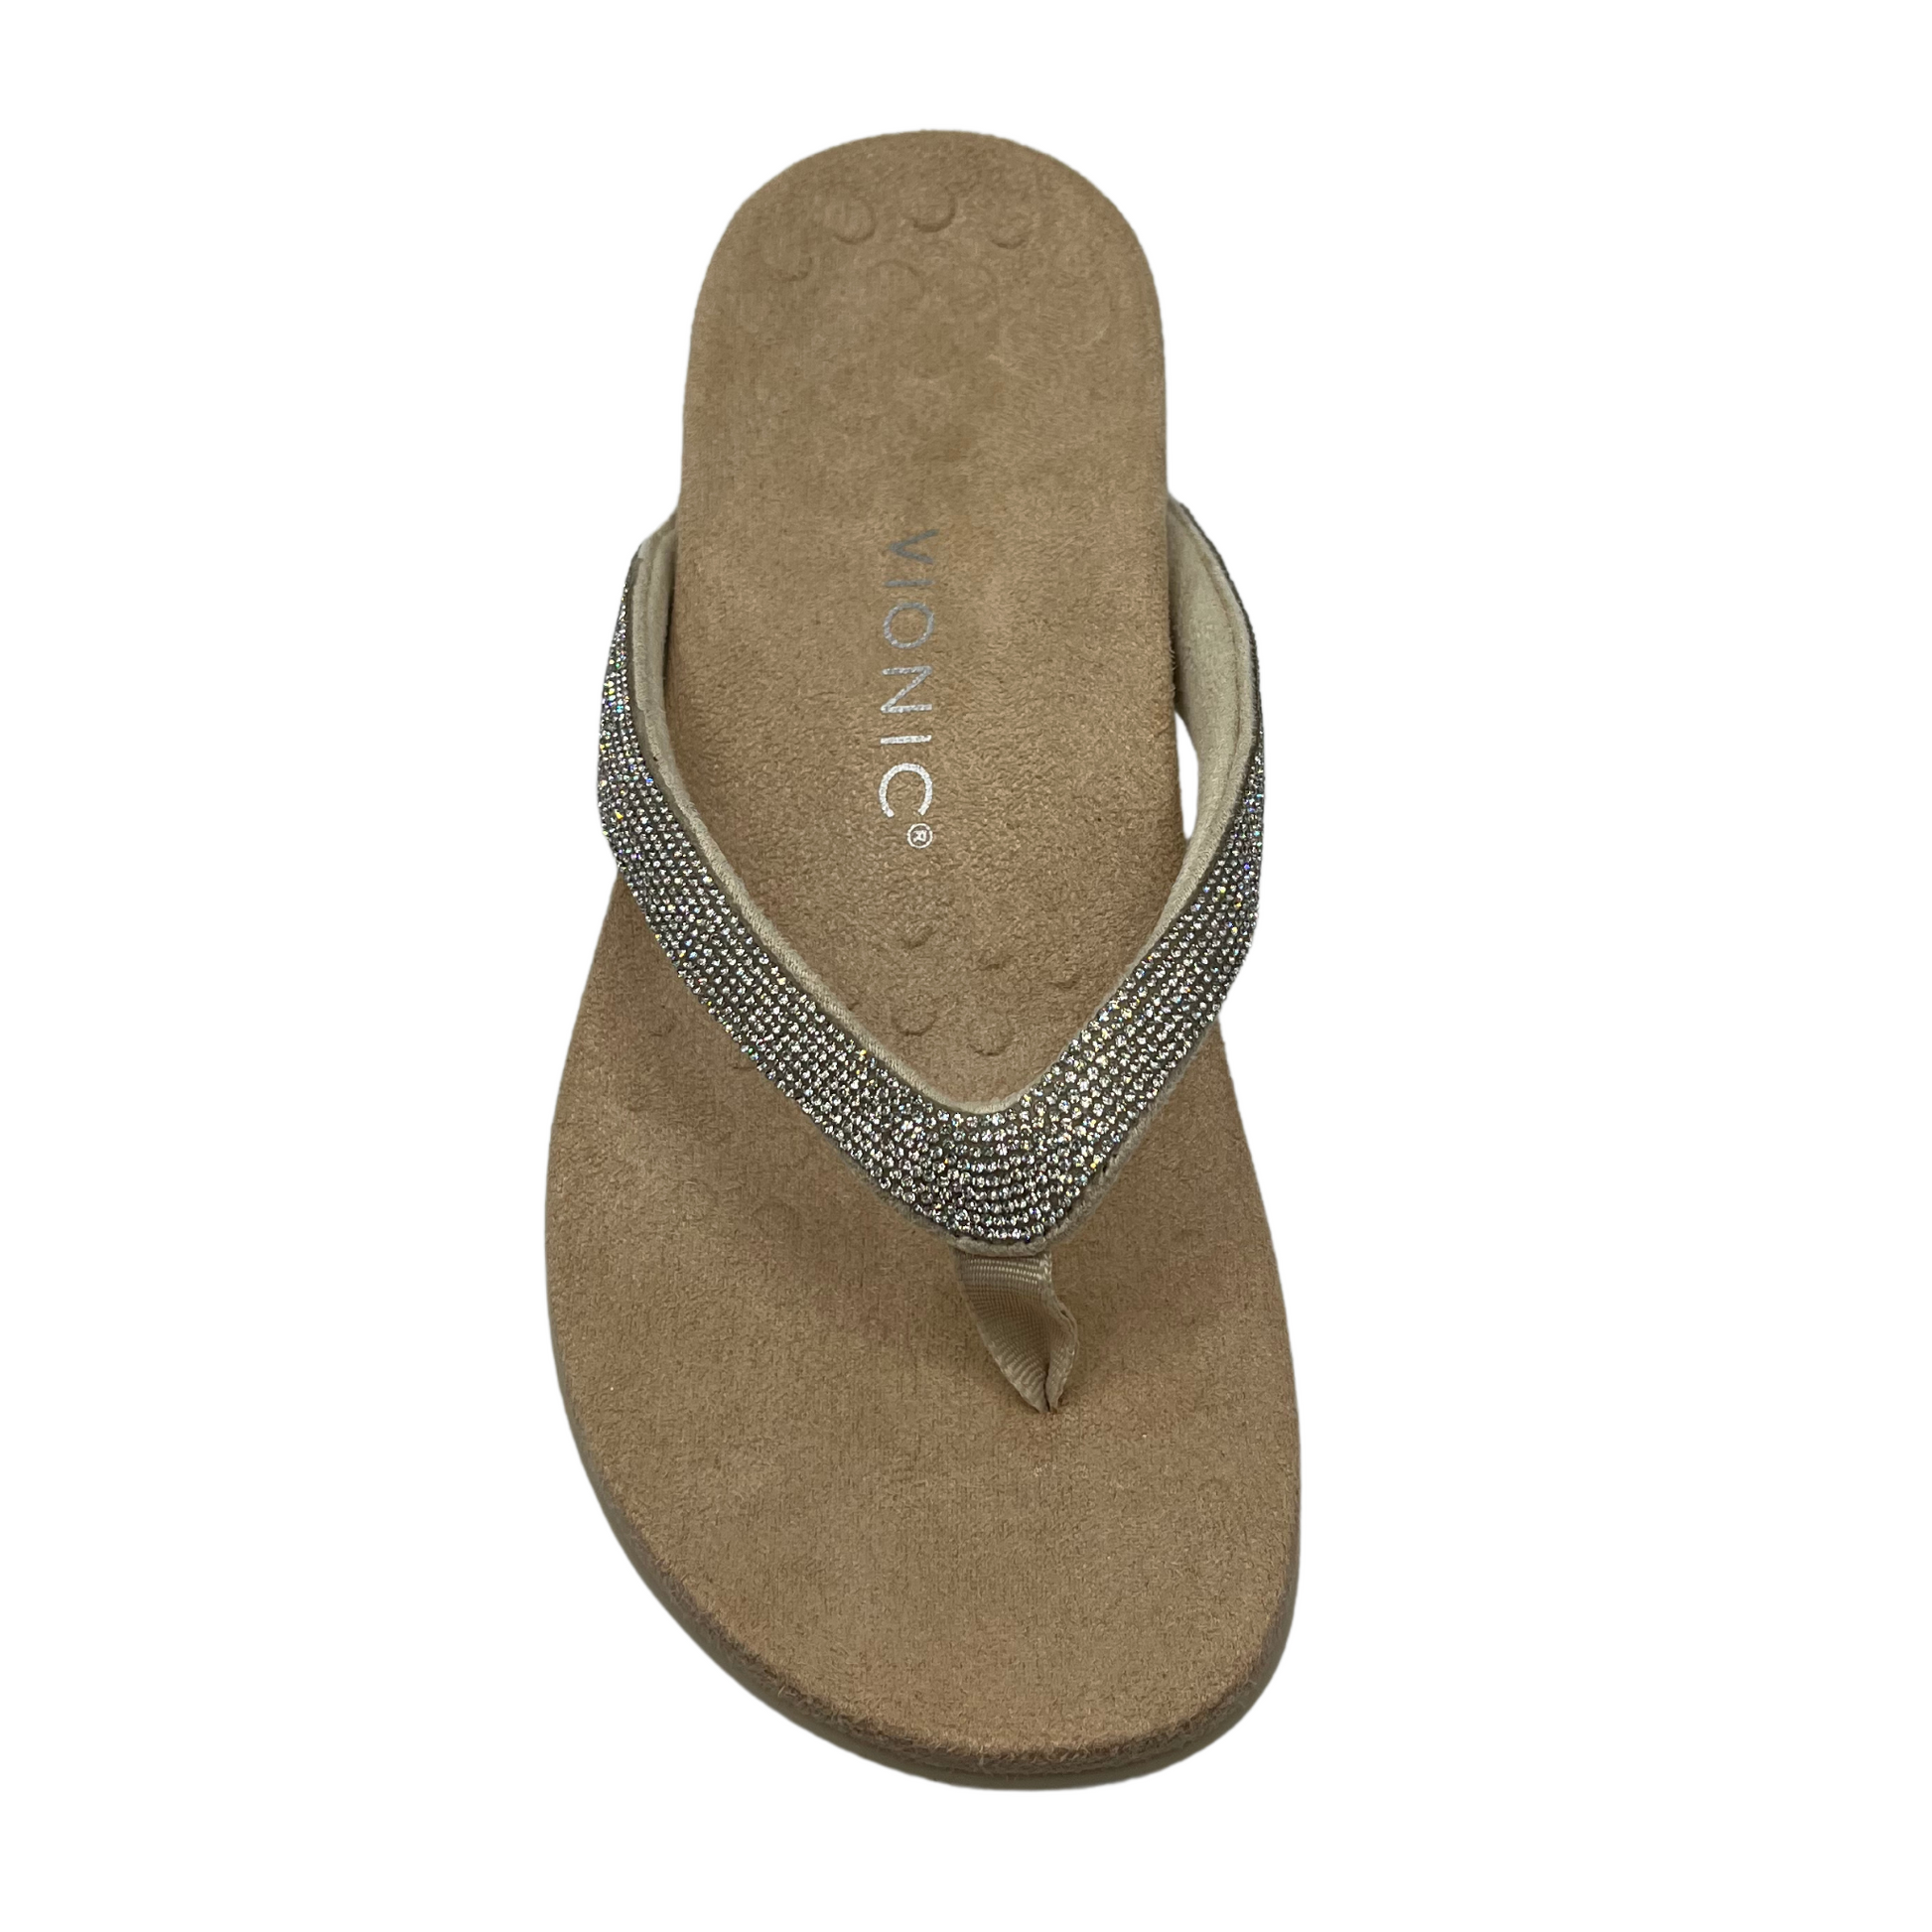 Top view of brown and silver sandal with crystal straps and microfibre footbed